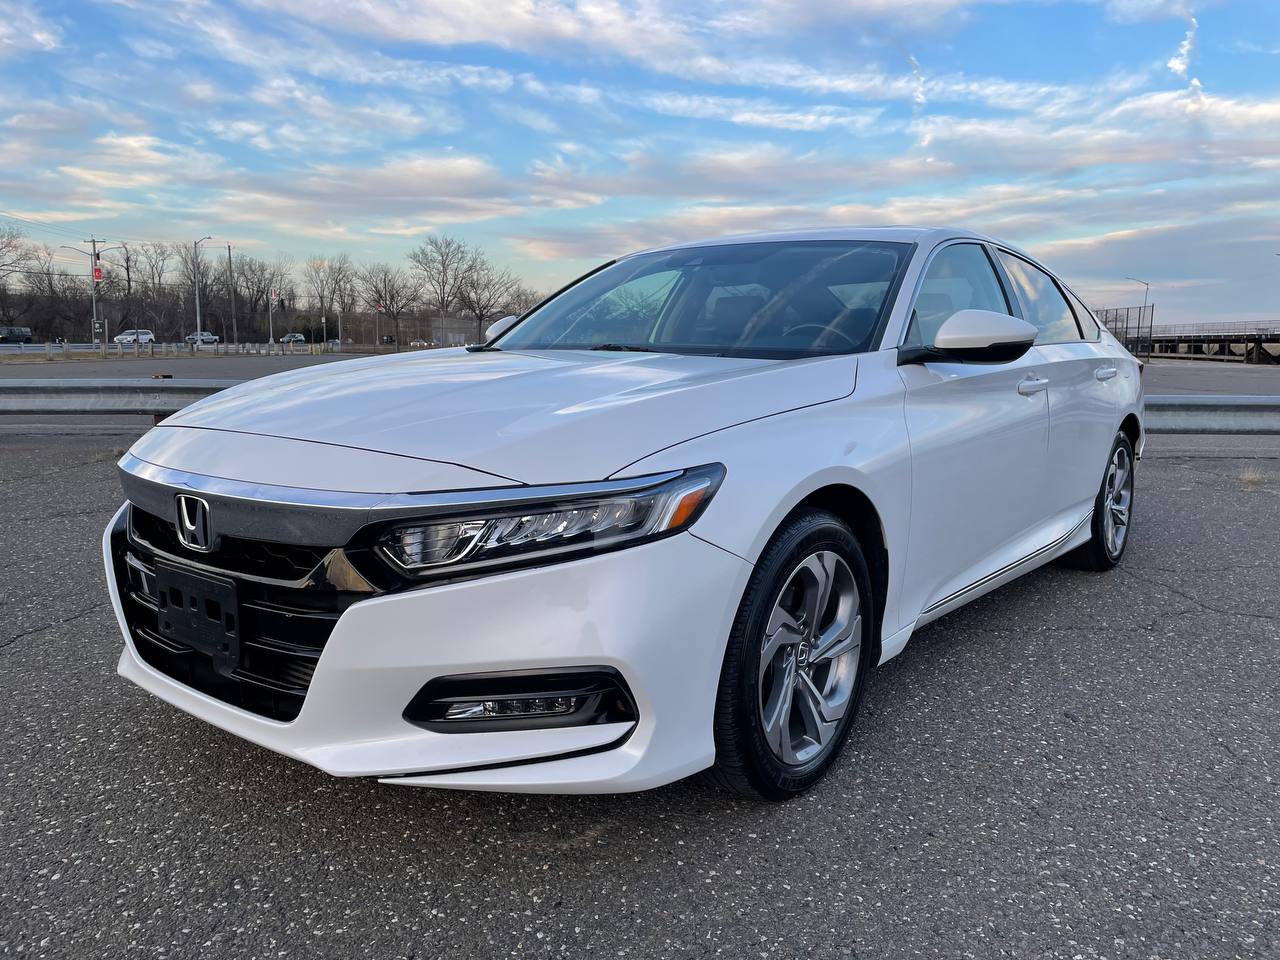 Used Car - 2020 Honda Accord EX-L for Sale in Staten Island, NY